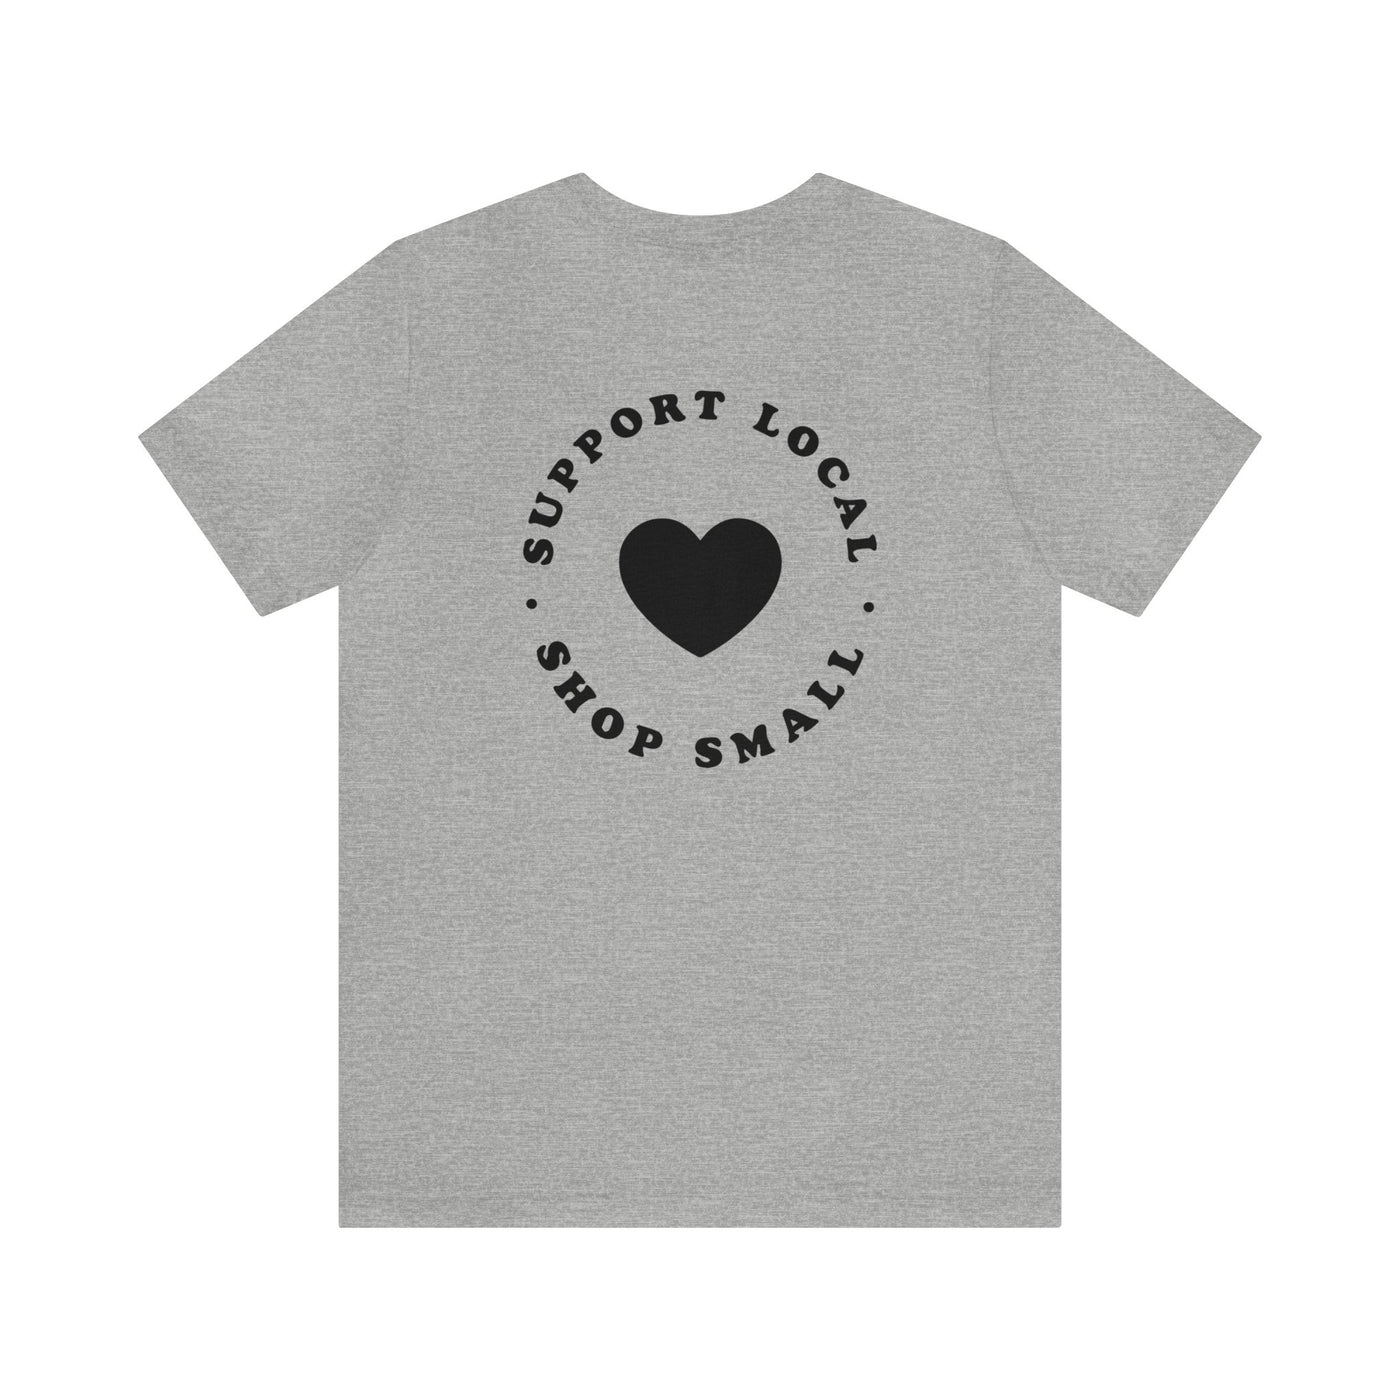 Support Local Shop Small Unisex T-Shirt